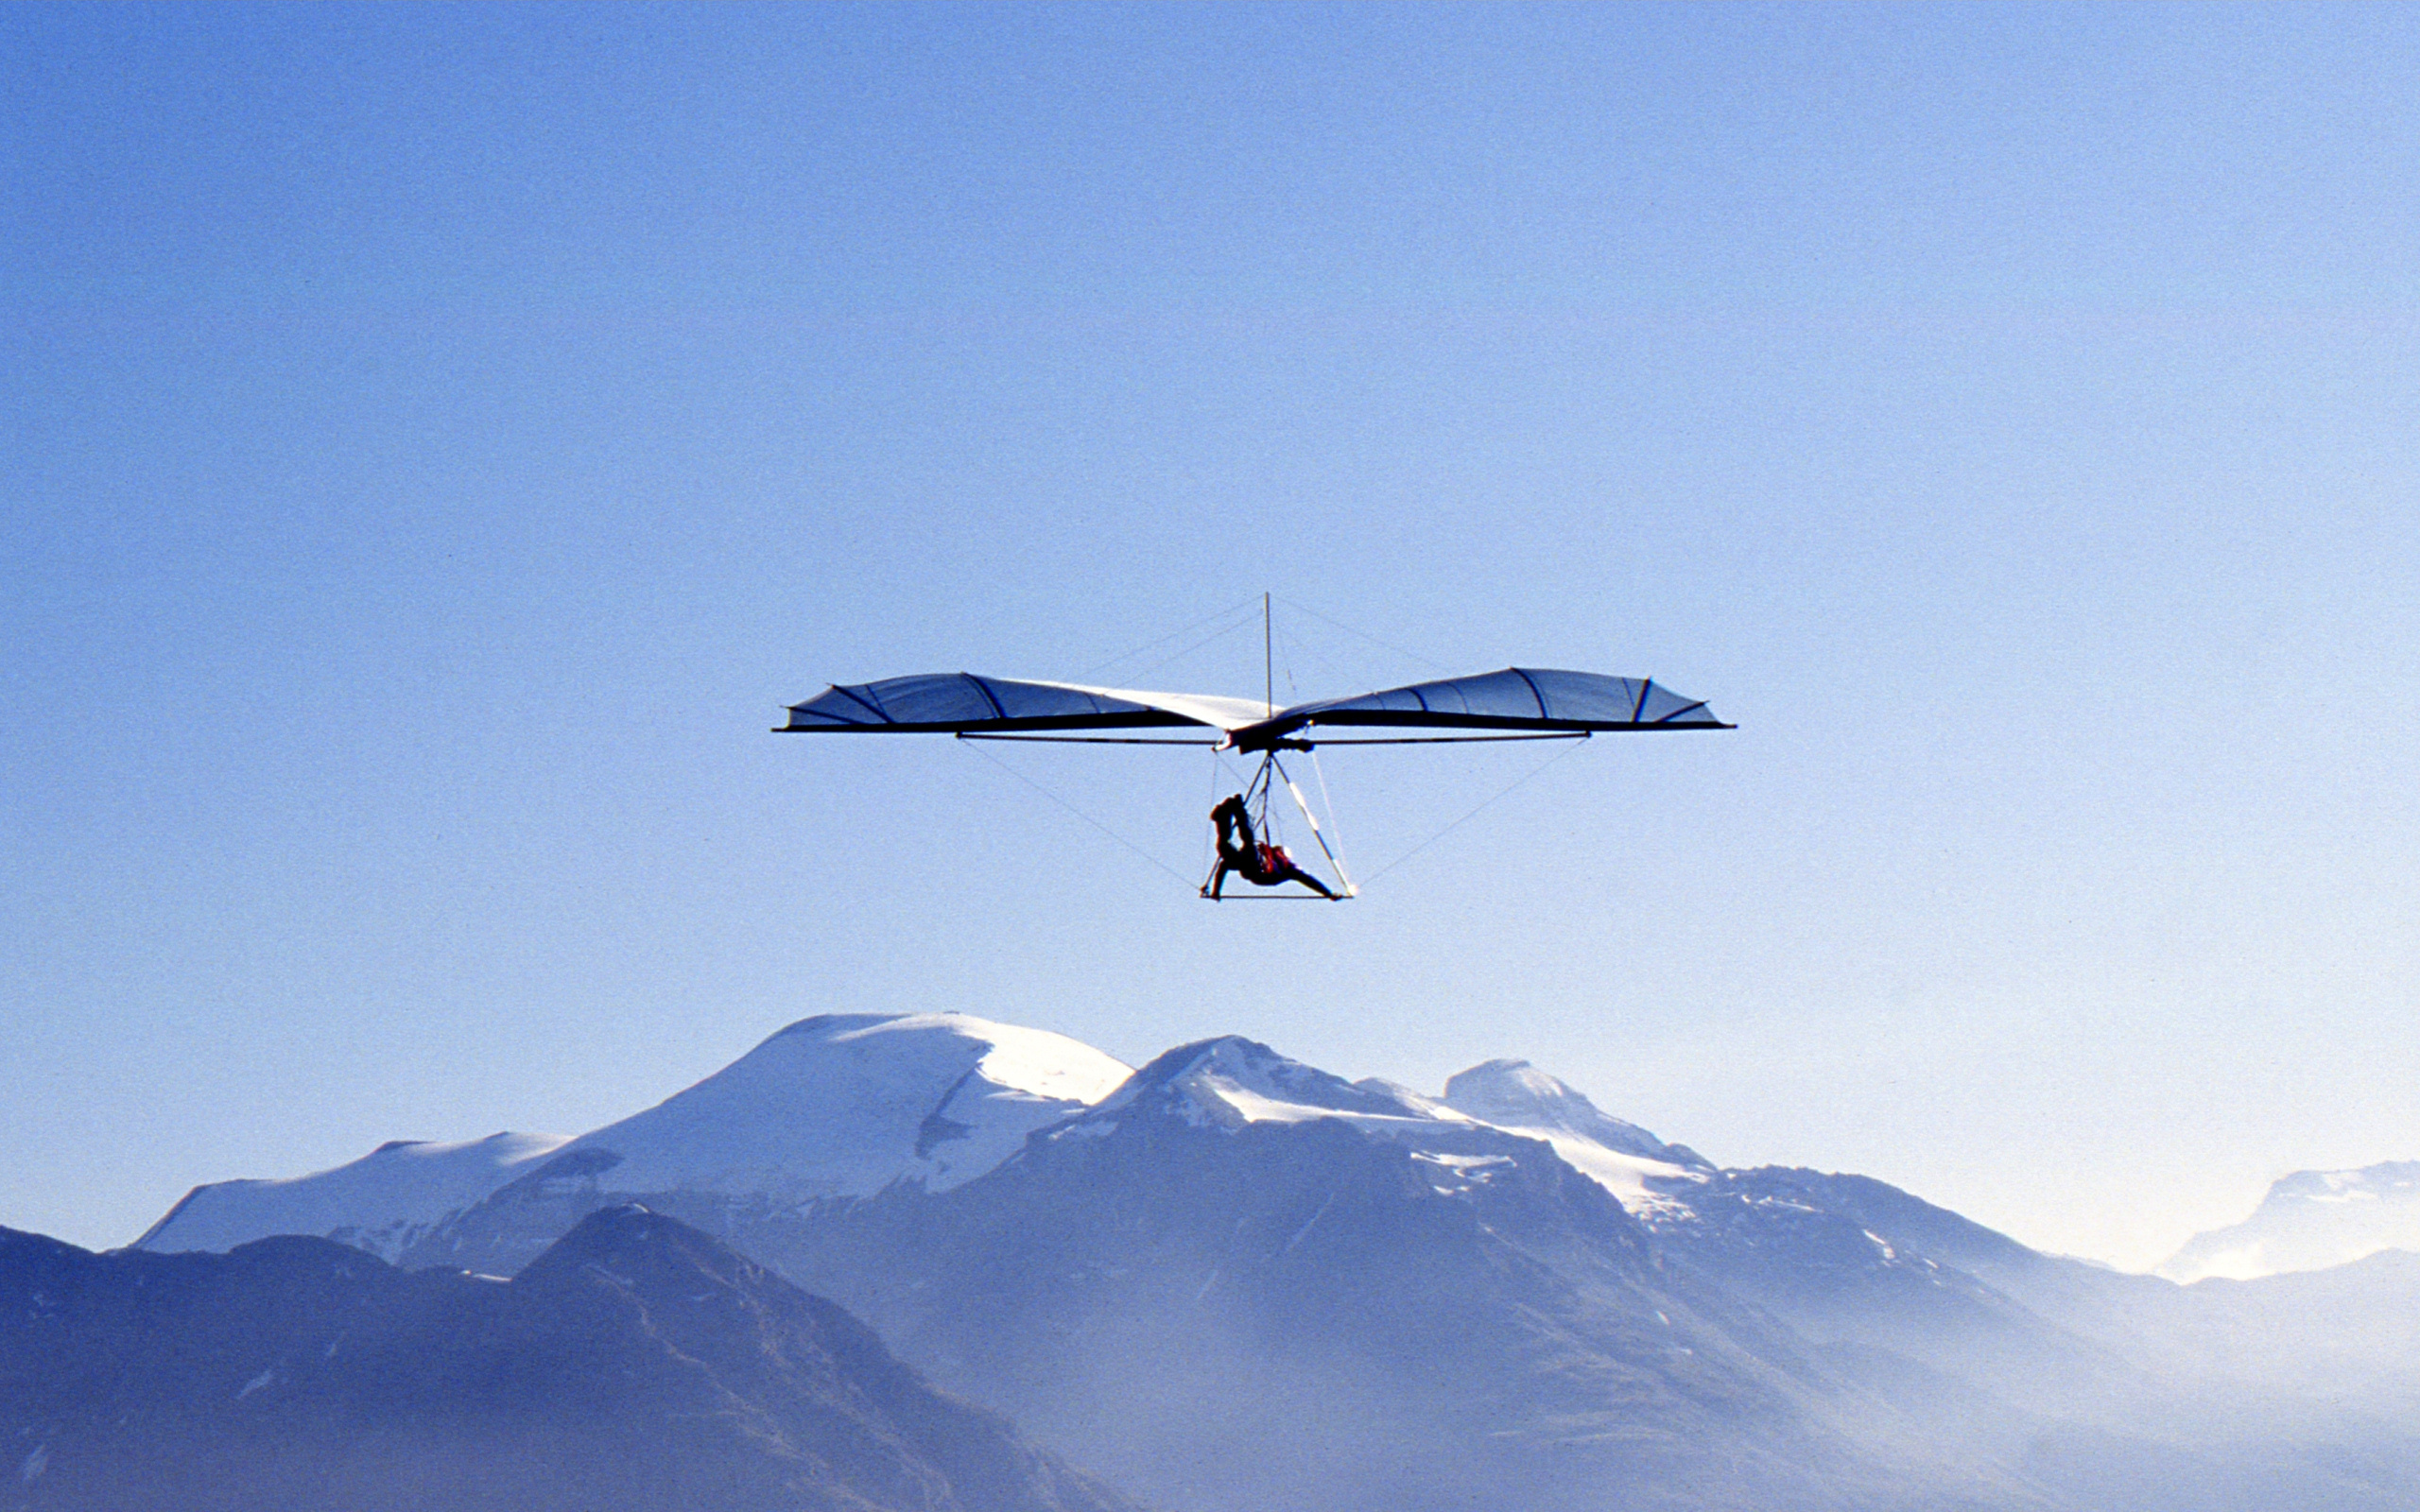 Gliding: Operated foot-launched hang glider near the mountains, Extreme sport. 2560x1600 HD Wallpaper.